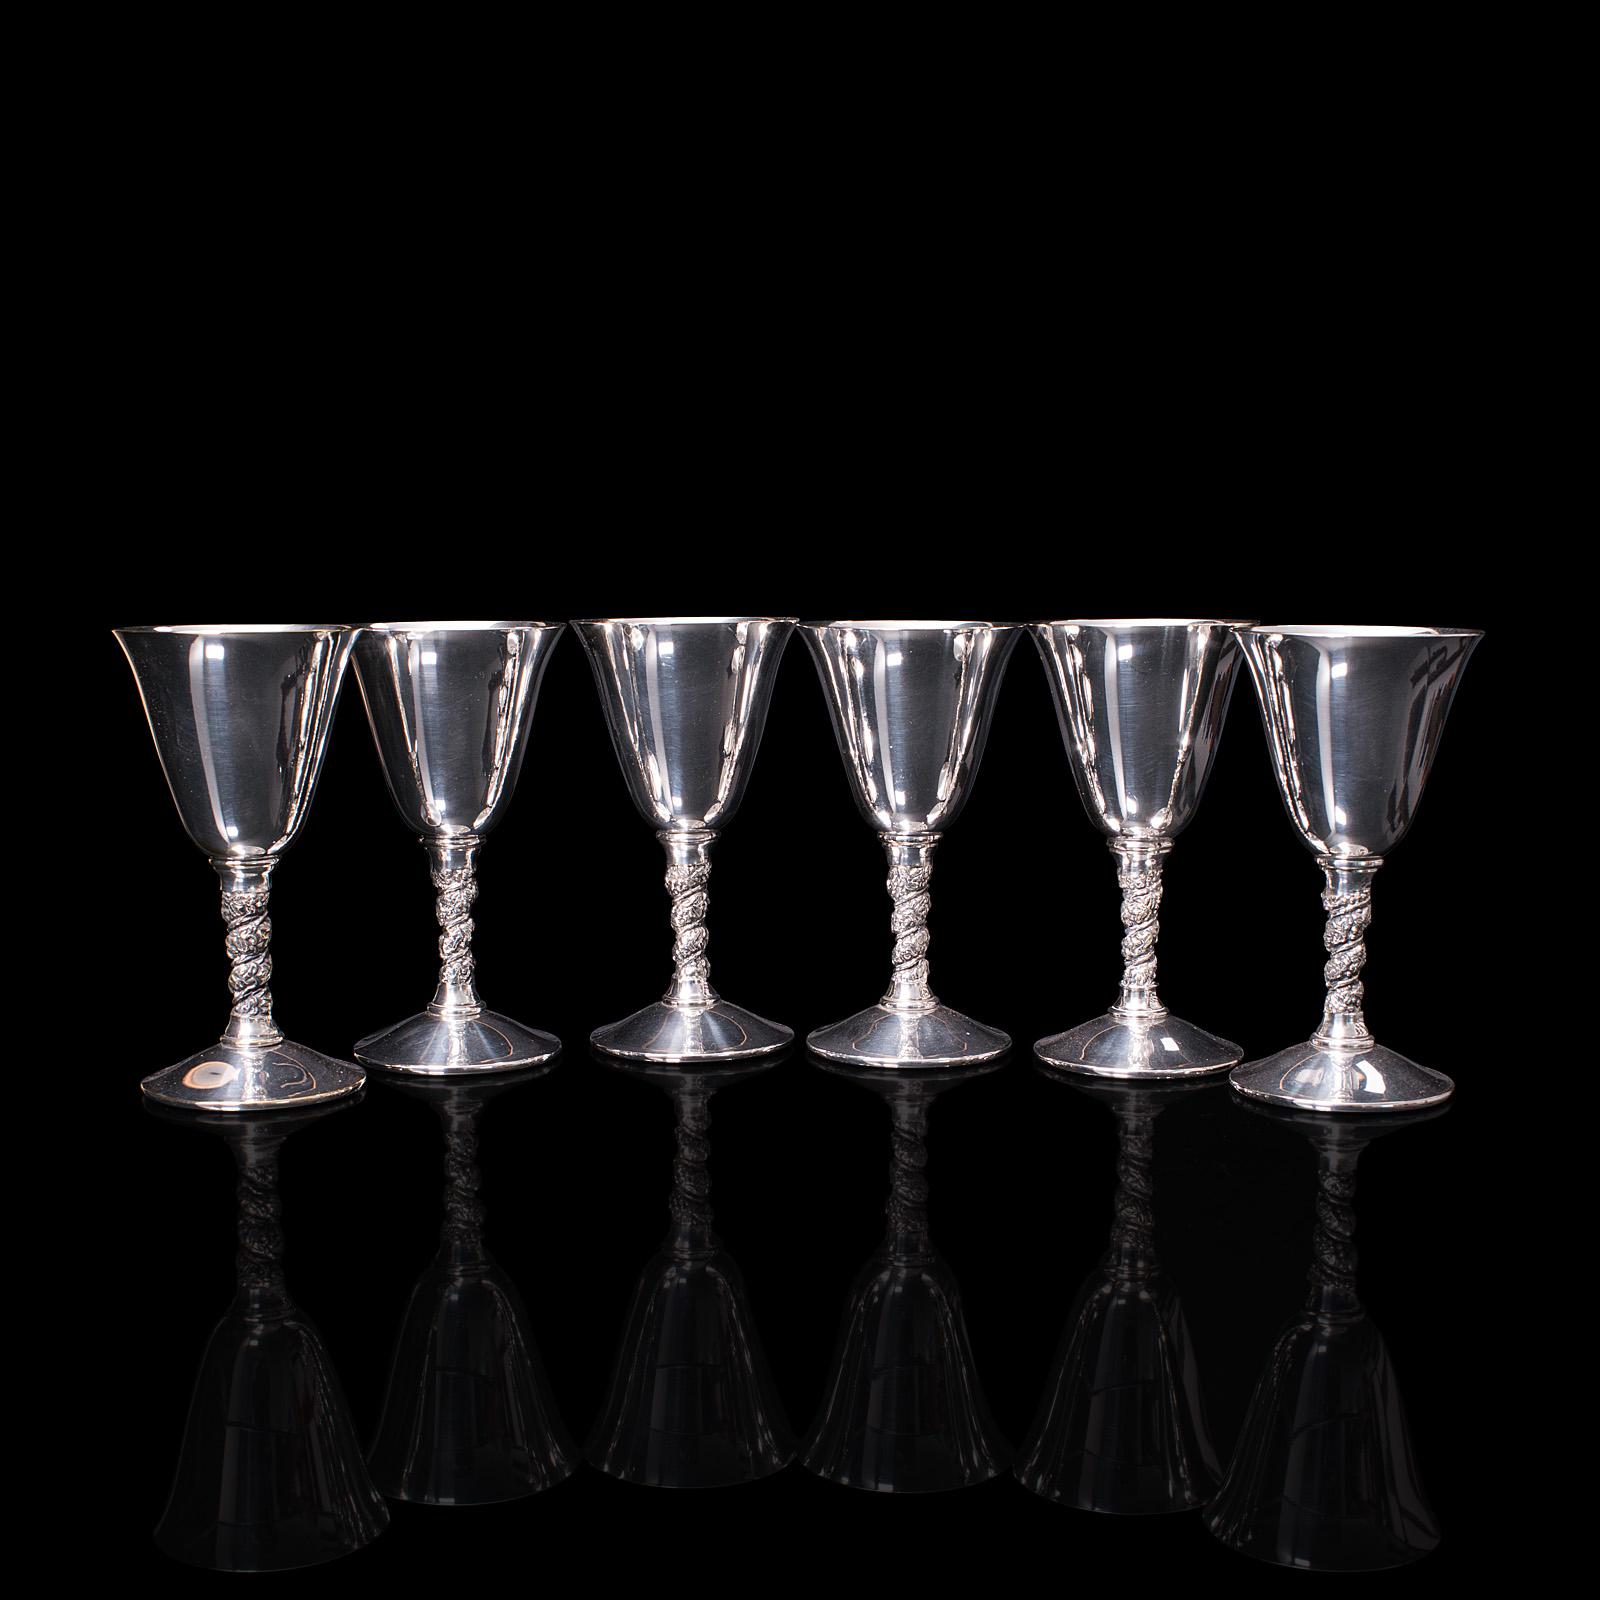 Our Stock # 18.7882

This is a set of 6 vintage sherry goblets. A Spanish, silver plate celebration liqueur tot, dating to the late 20th century, circa 1970.

Dashing and comprehensive set of tactile sherry goblets
Displays a desirable aged